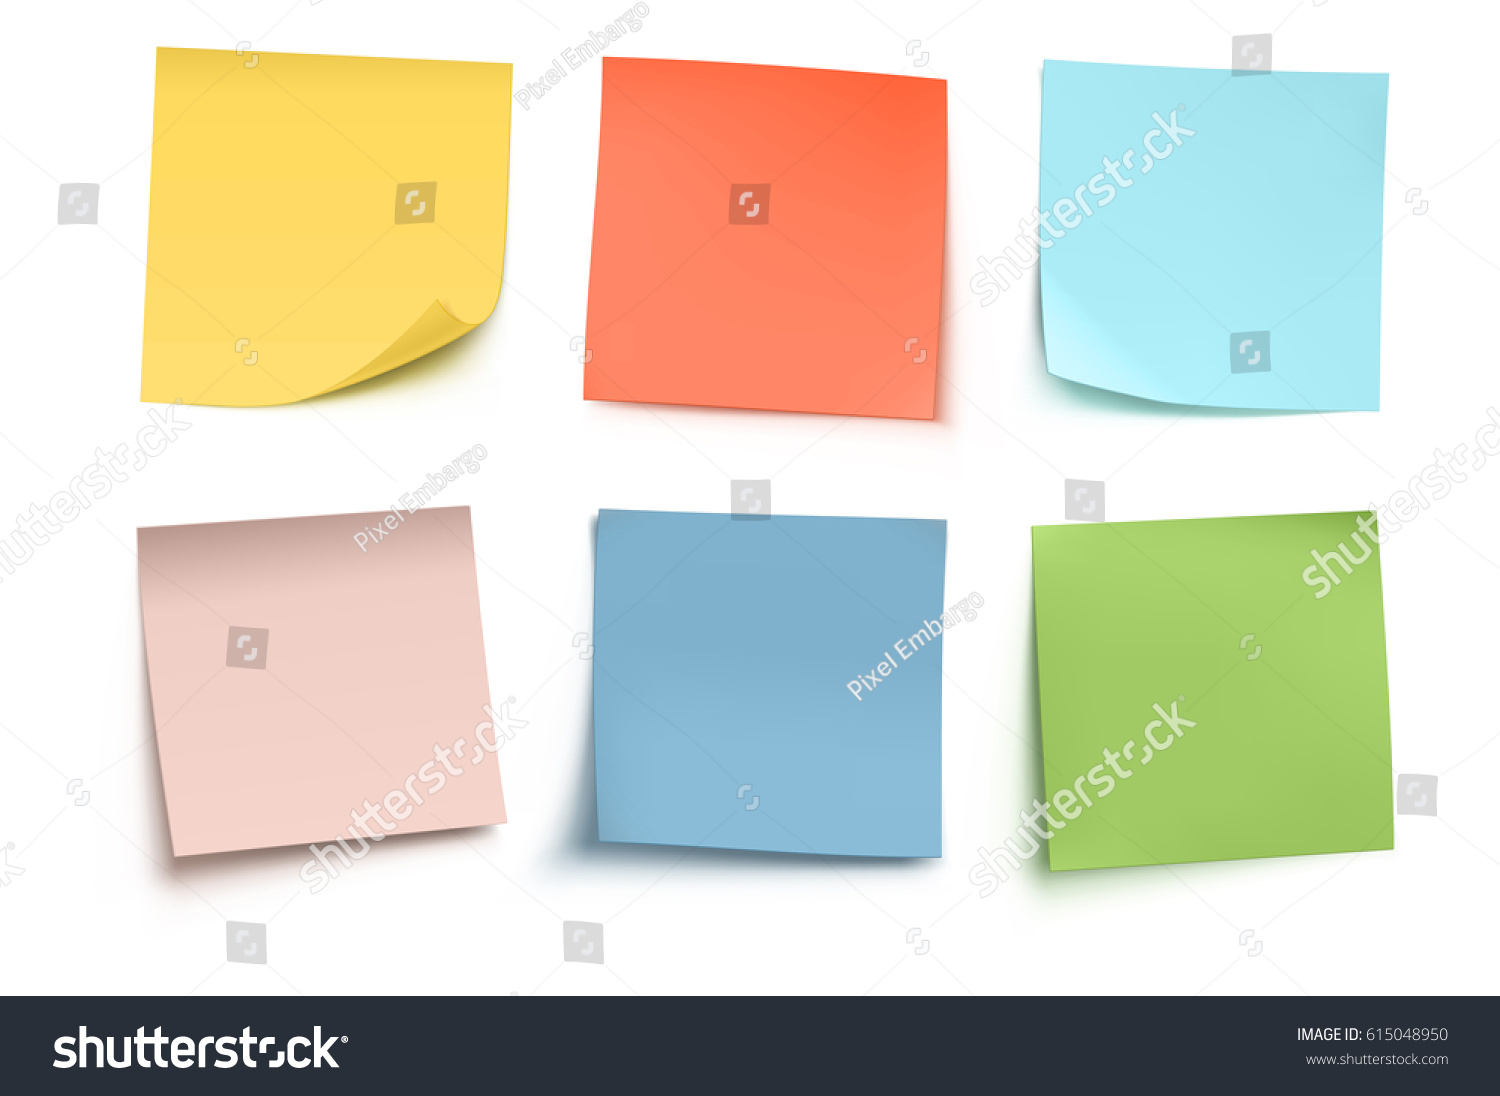 Vector illustration of multicolor post it notes isolated on white background. #615048950